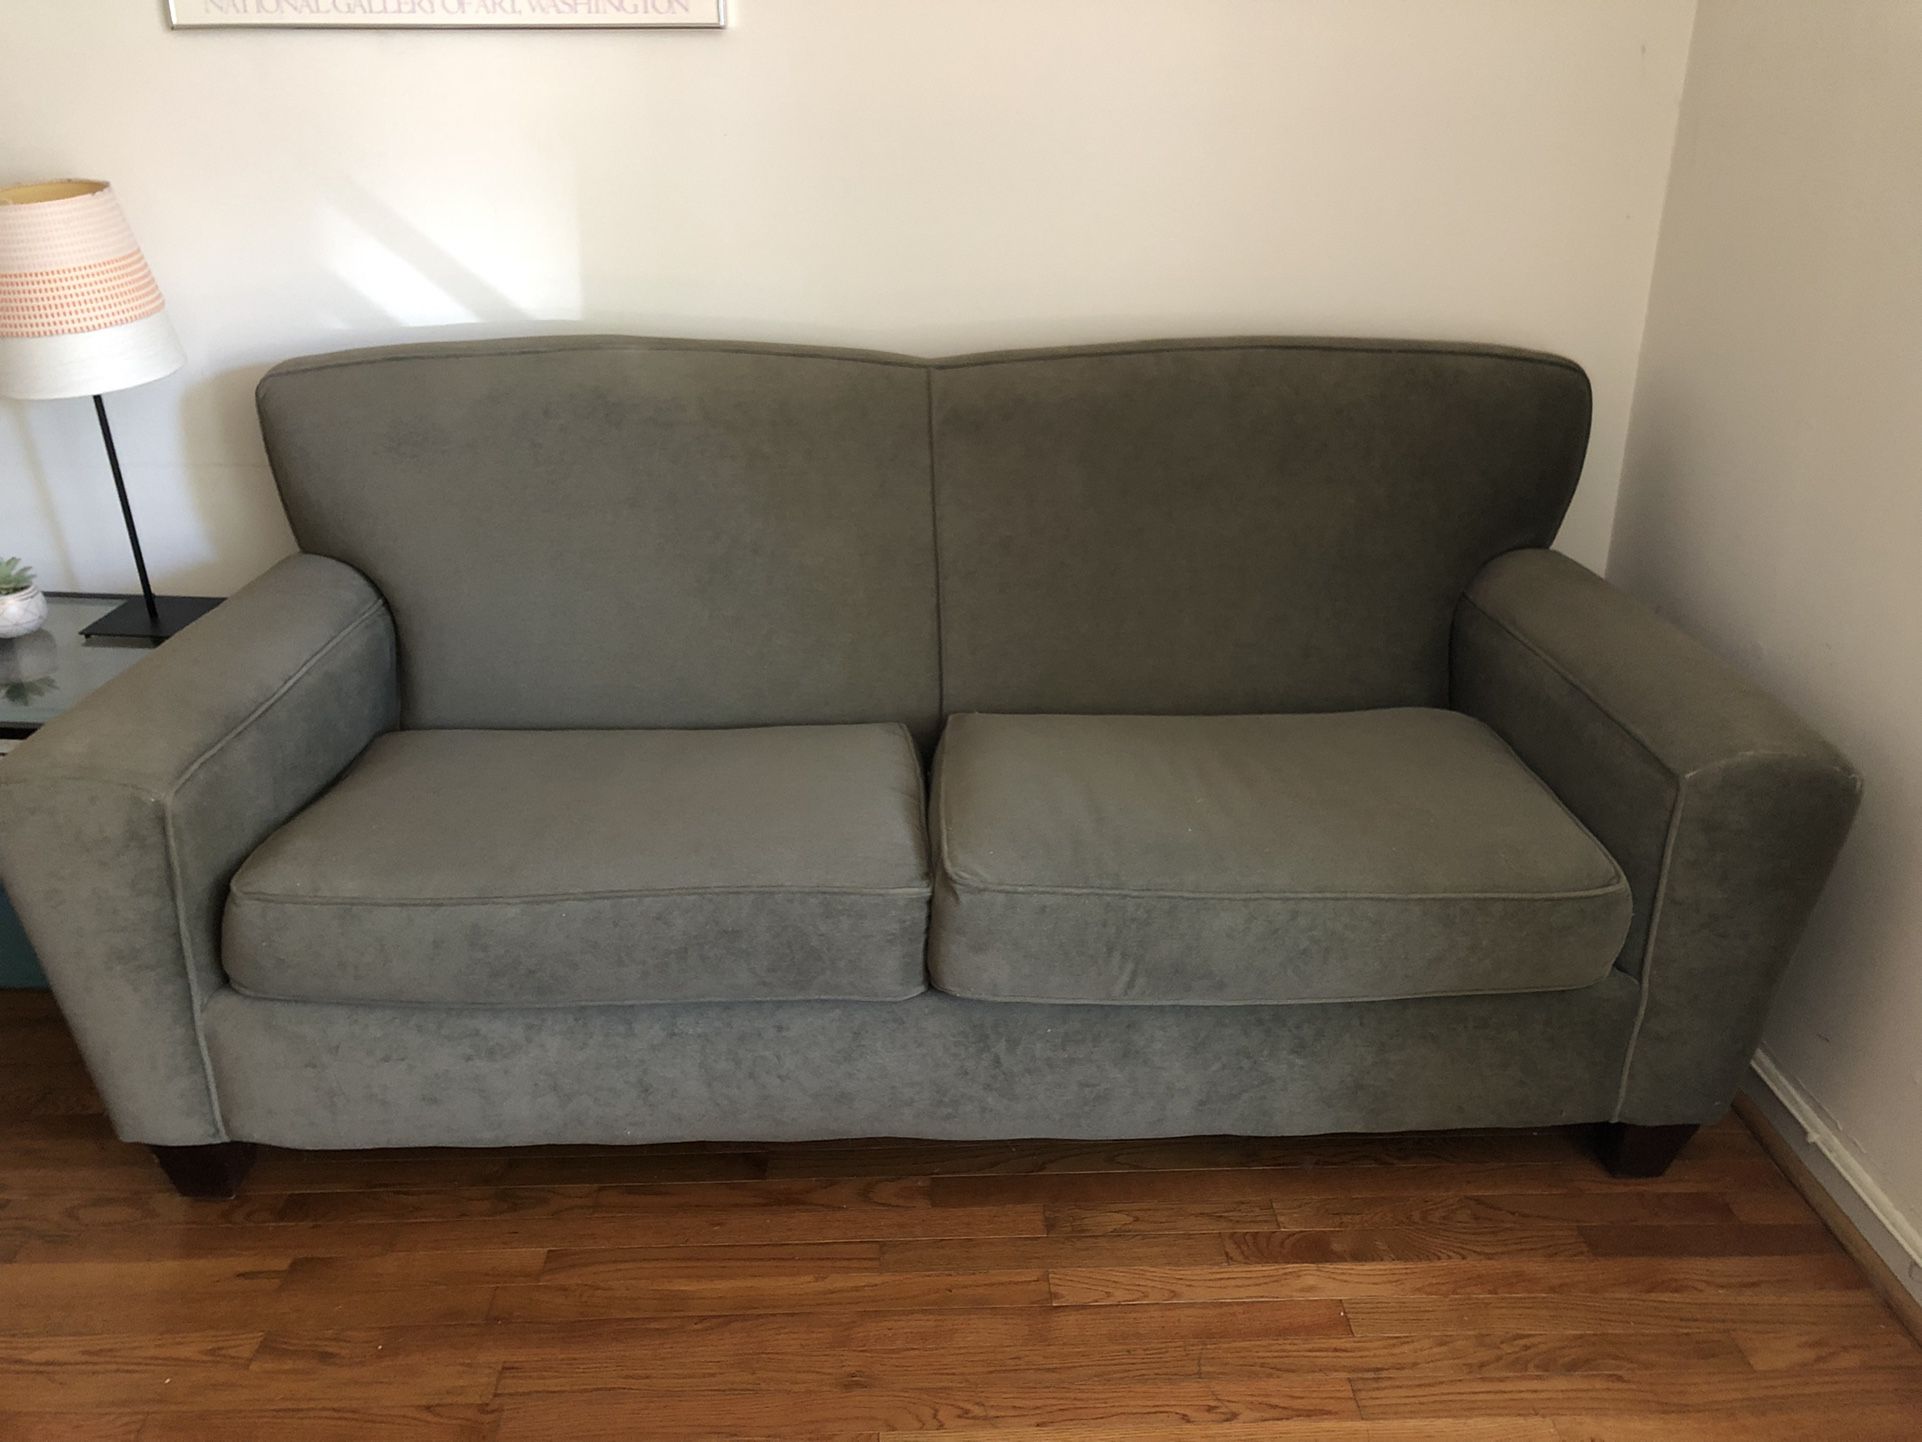 FREE! Sage Green Couch / Sofa